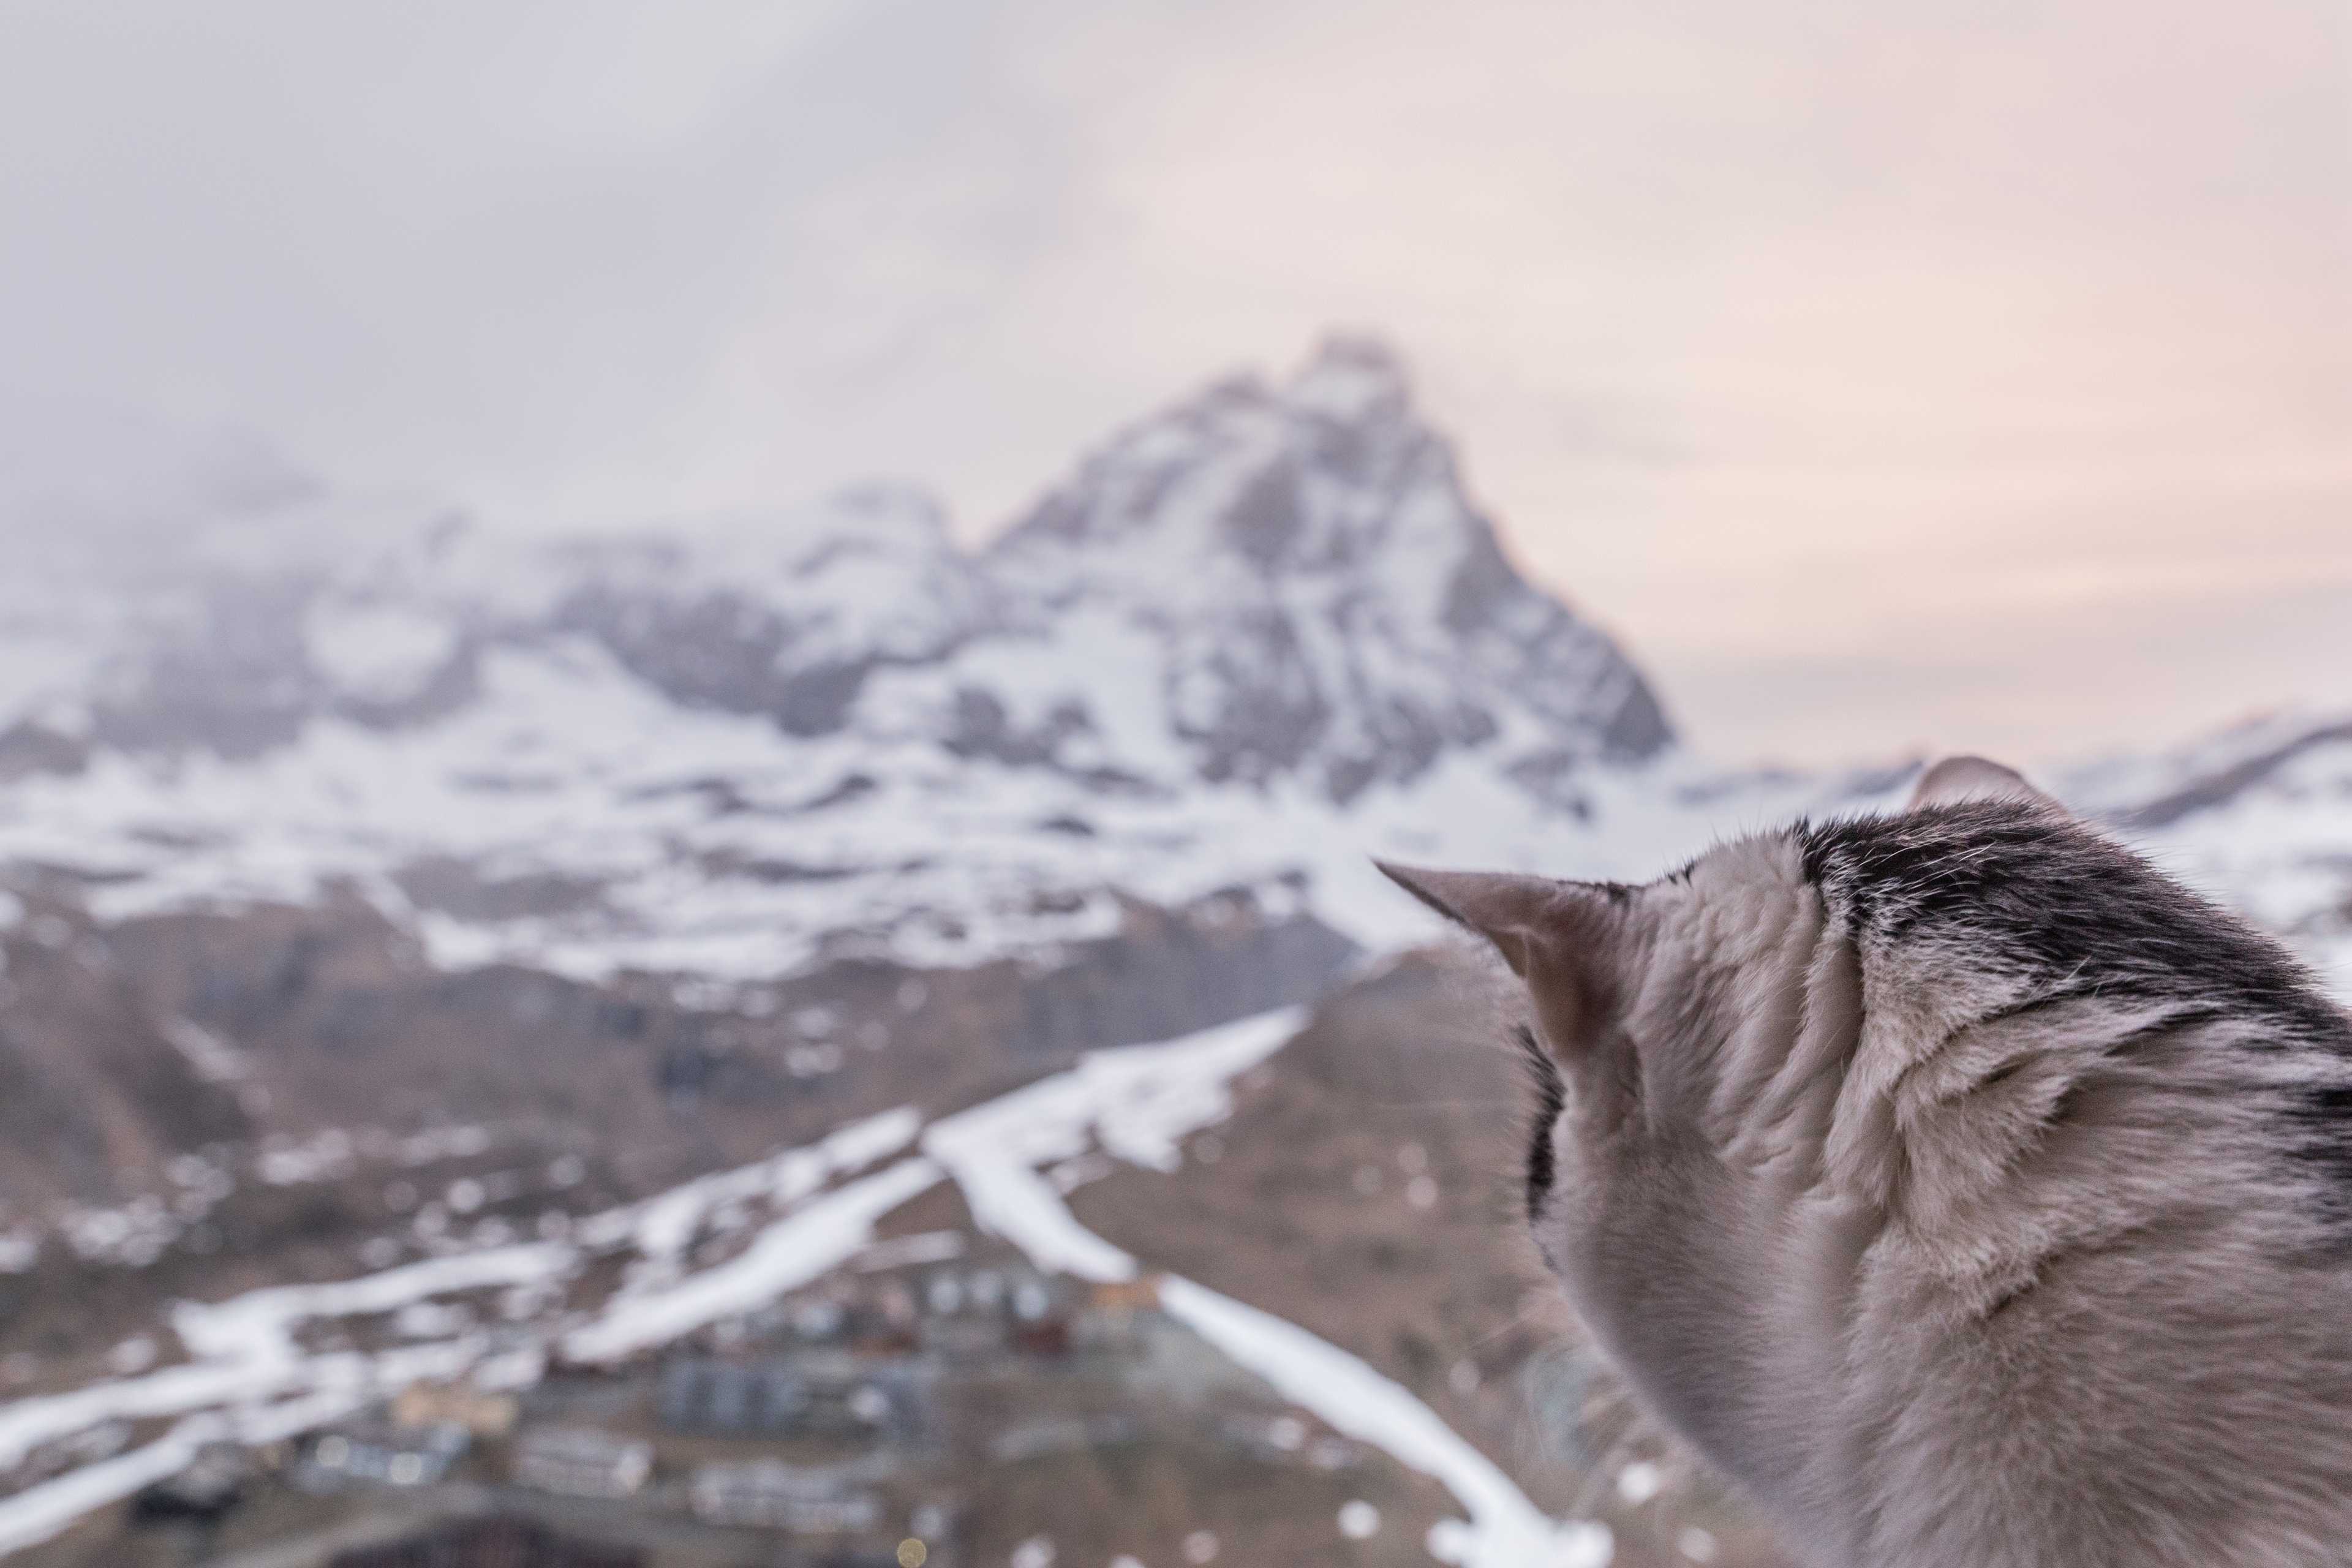 Our cat admiring the view of Matterhorn in Cervinia